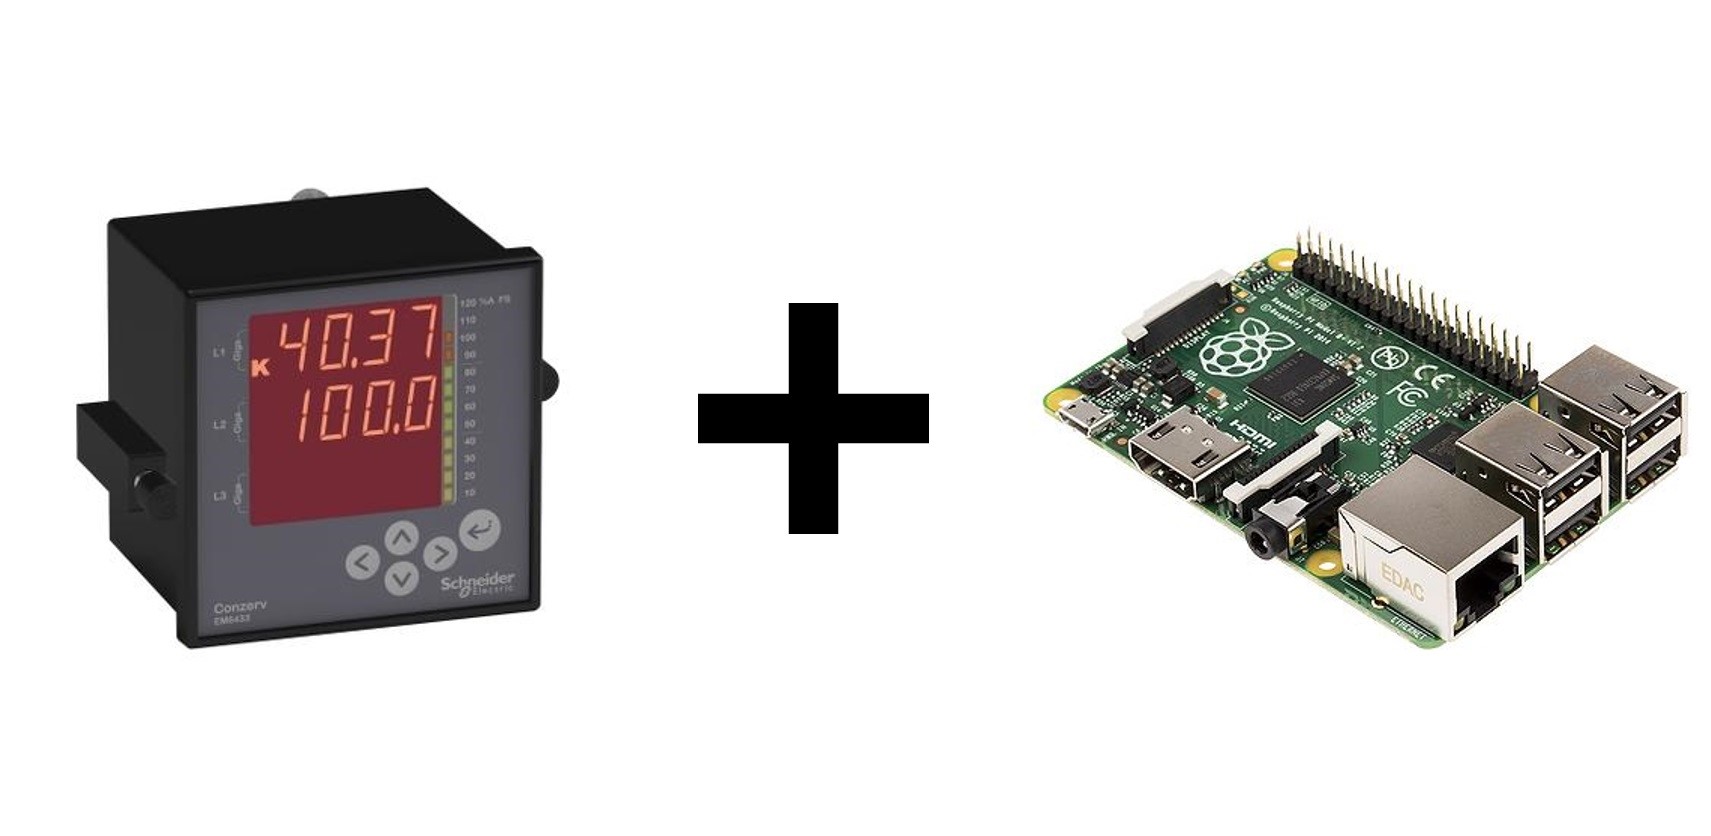 This project had raspberry pis. What's not to like?